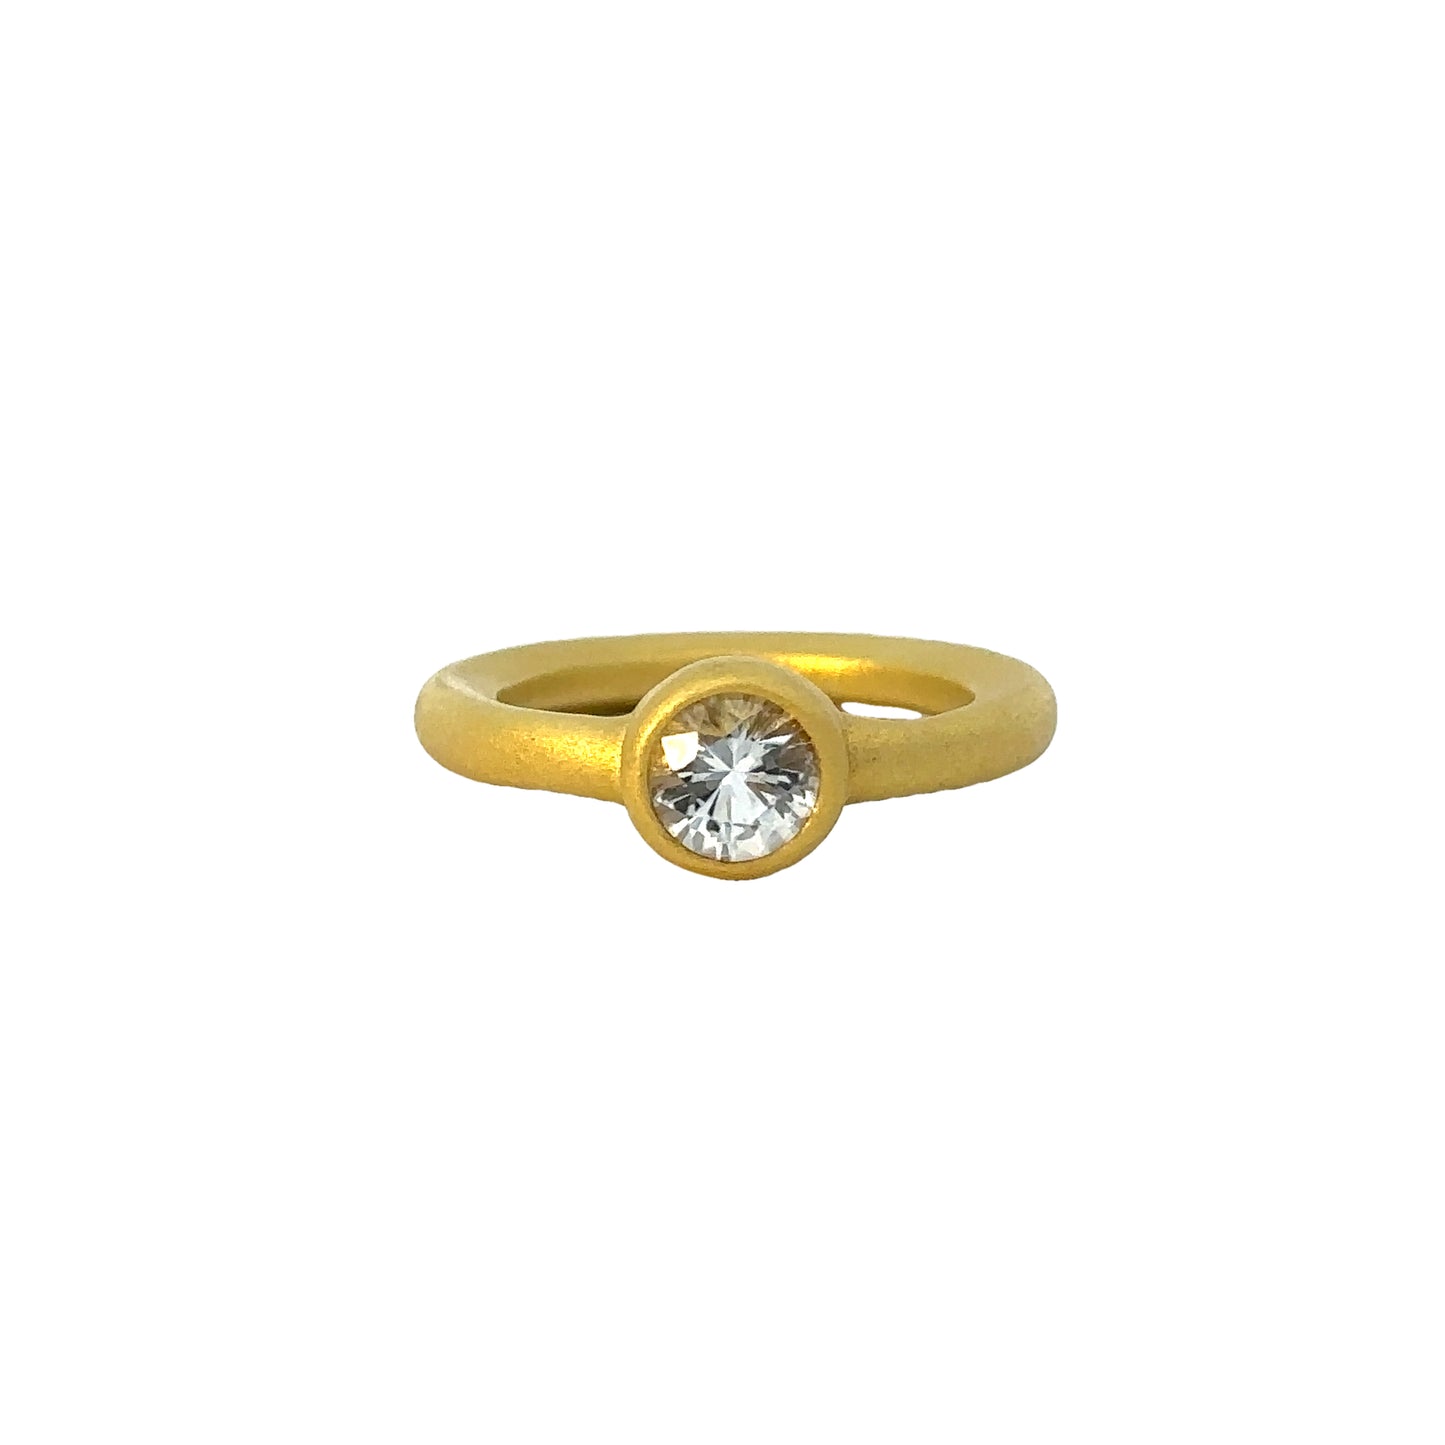 jewl // 006 - one of a kind ring - phenakite